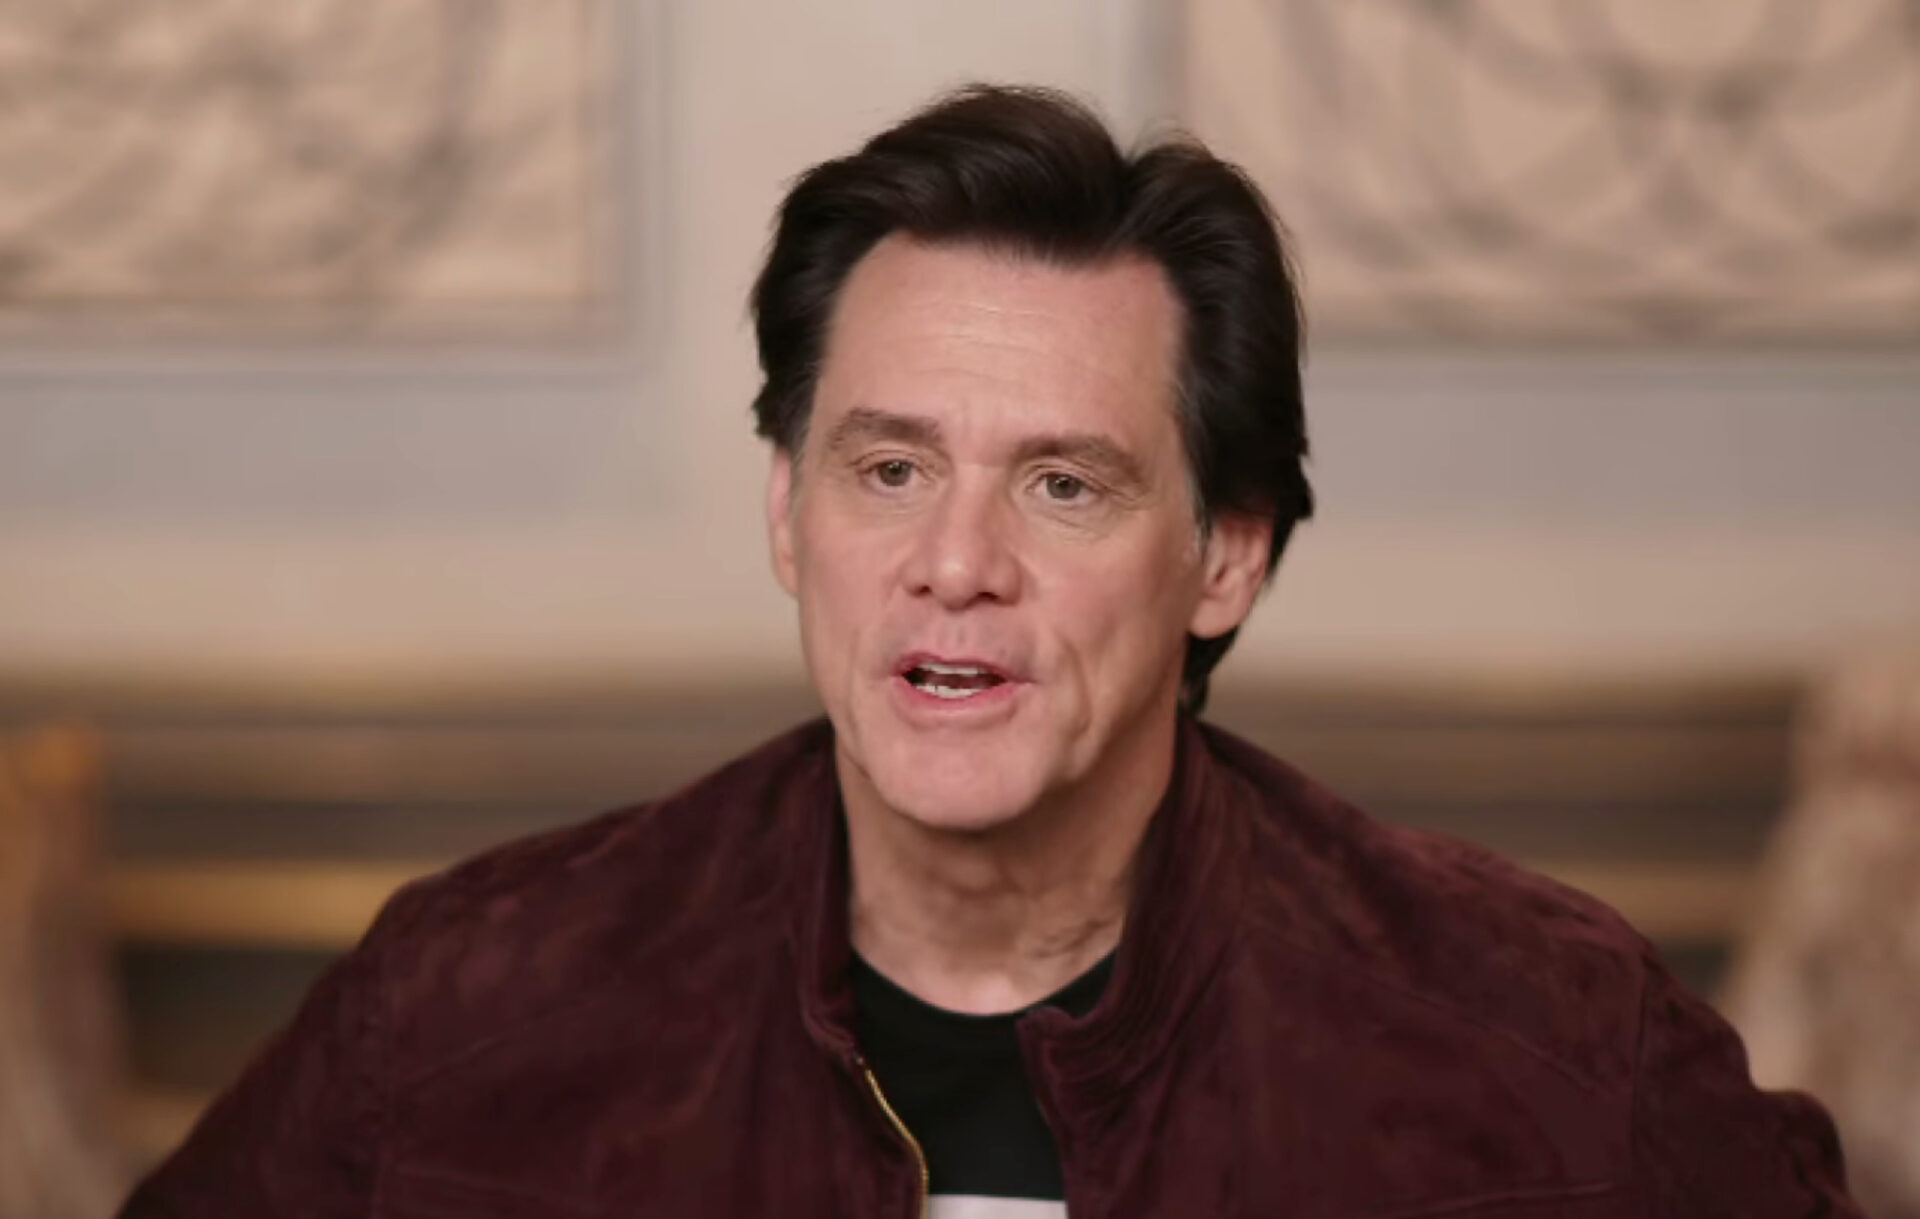 Jim Carrey slams Oscars audience for giving Will Smith standing ovation